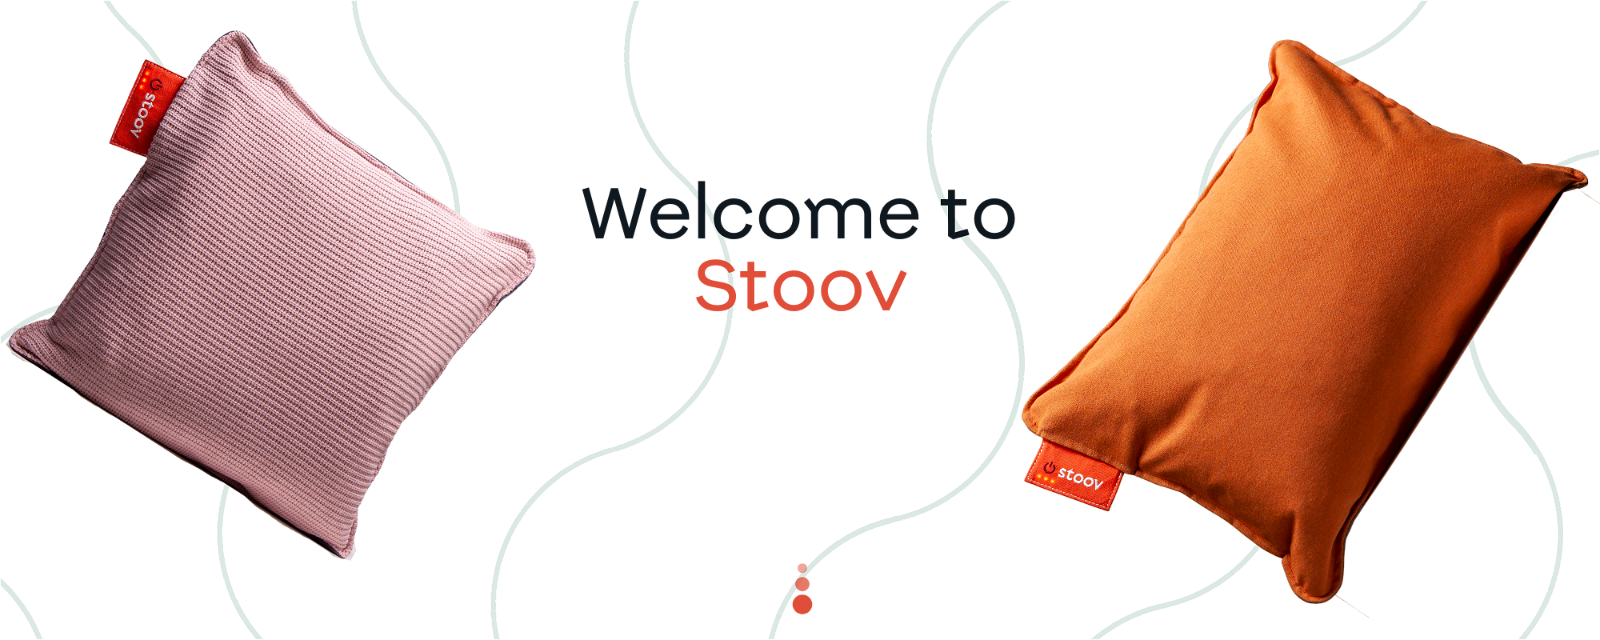 stoov: A warm welcome for you